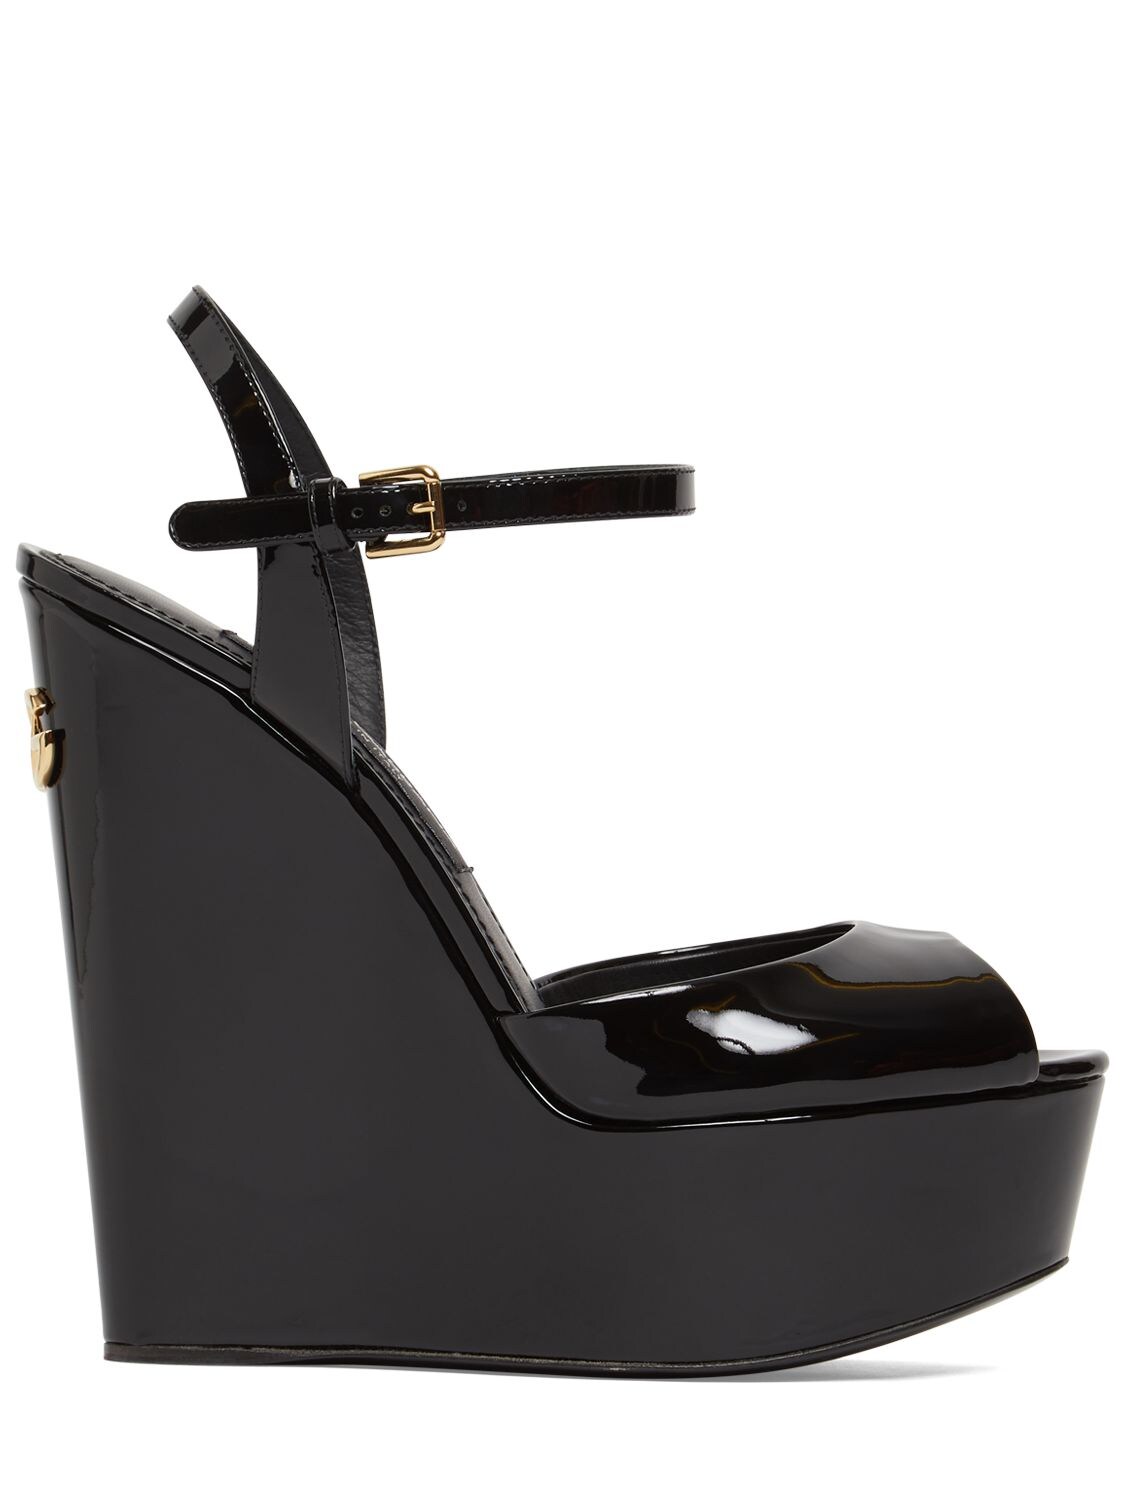 DOLCE & GABBANA 150MM PATENT LEATHER WEDGE